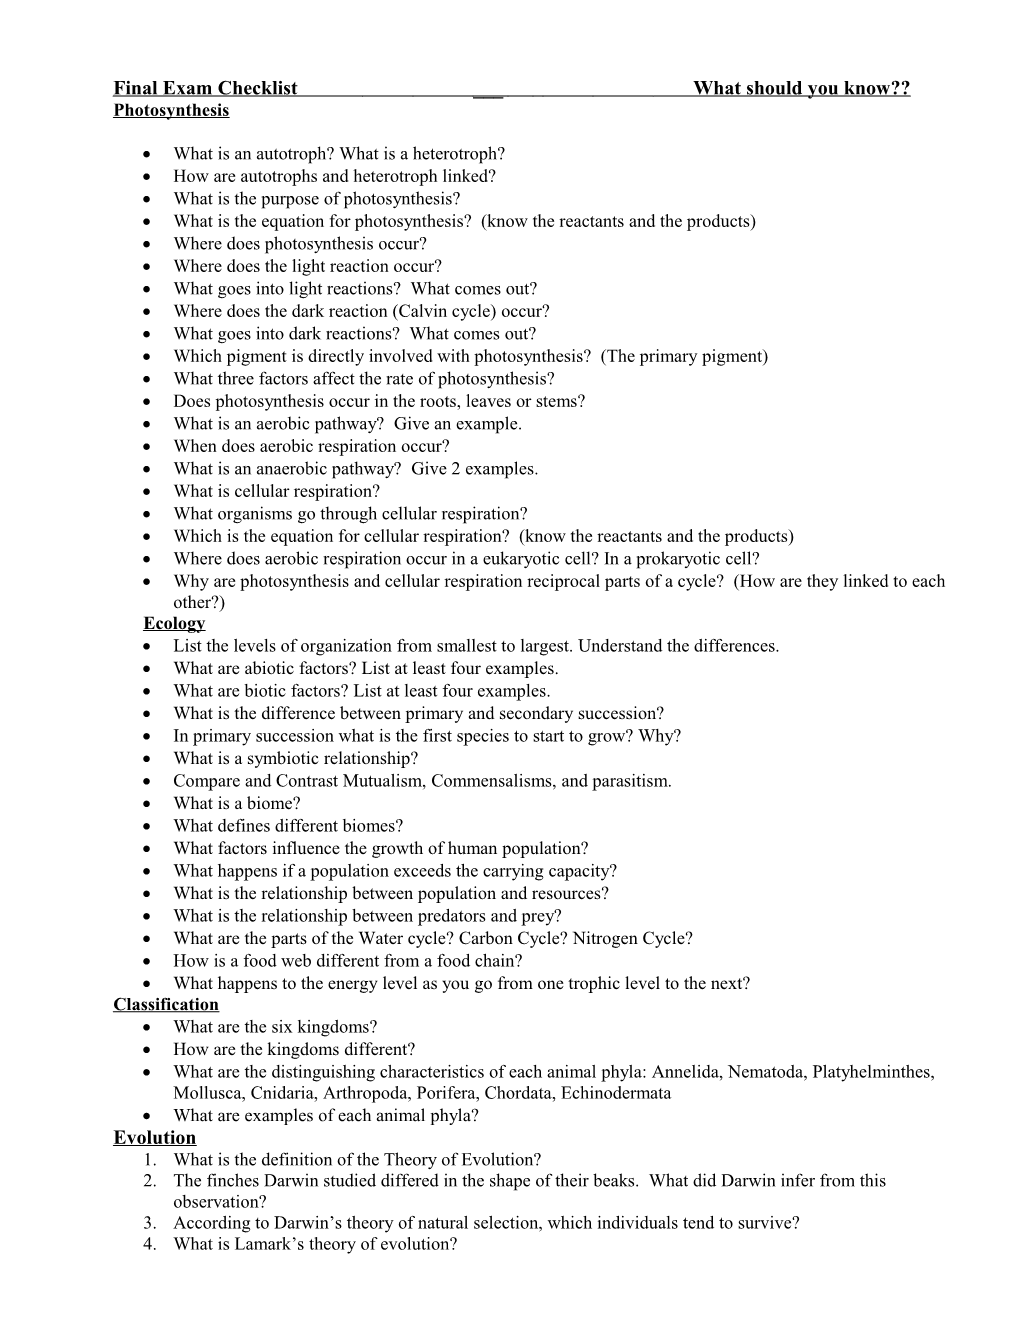 Final Exam Checklist ___ What Should You Know